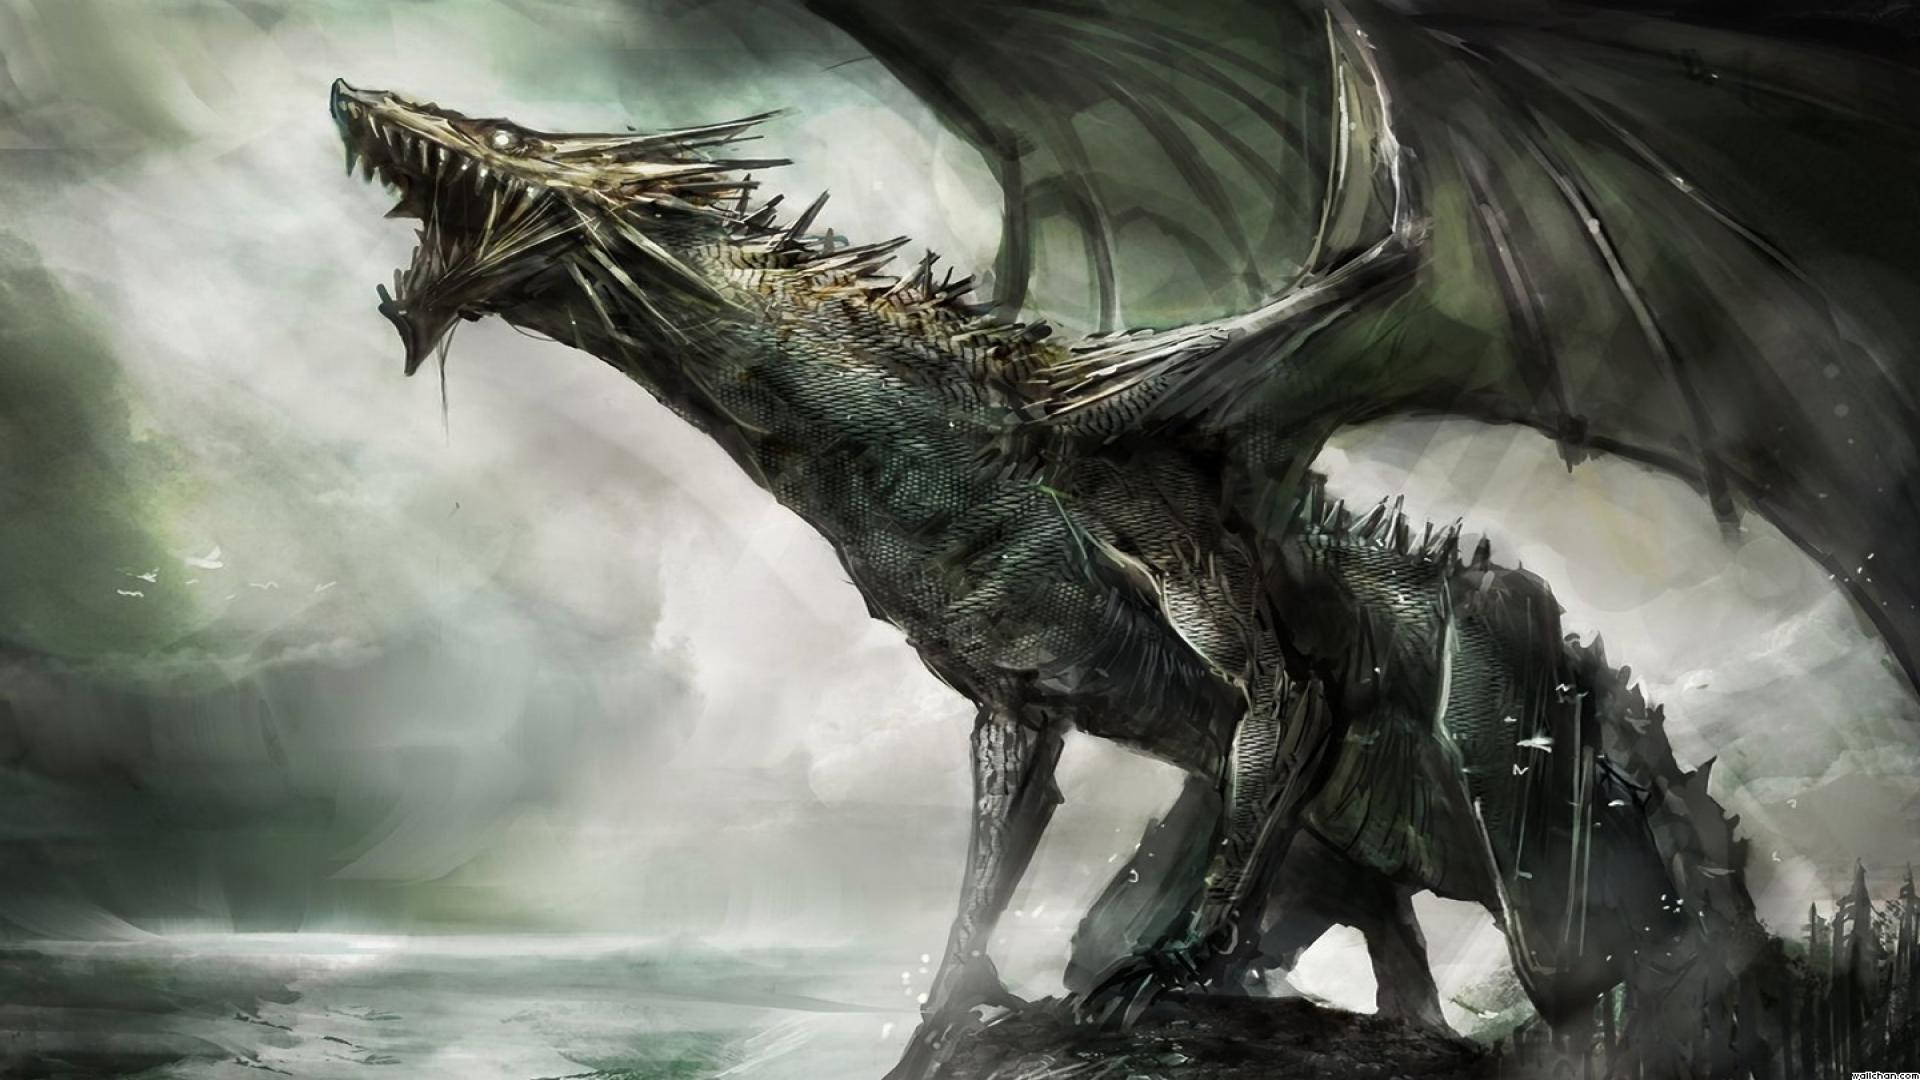 Cool Silver Green Dragon Background